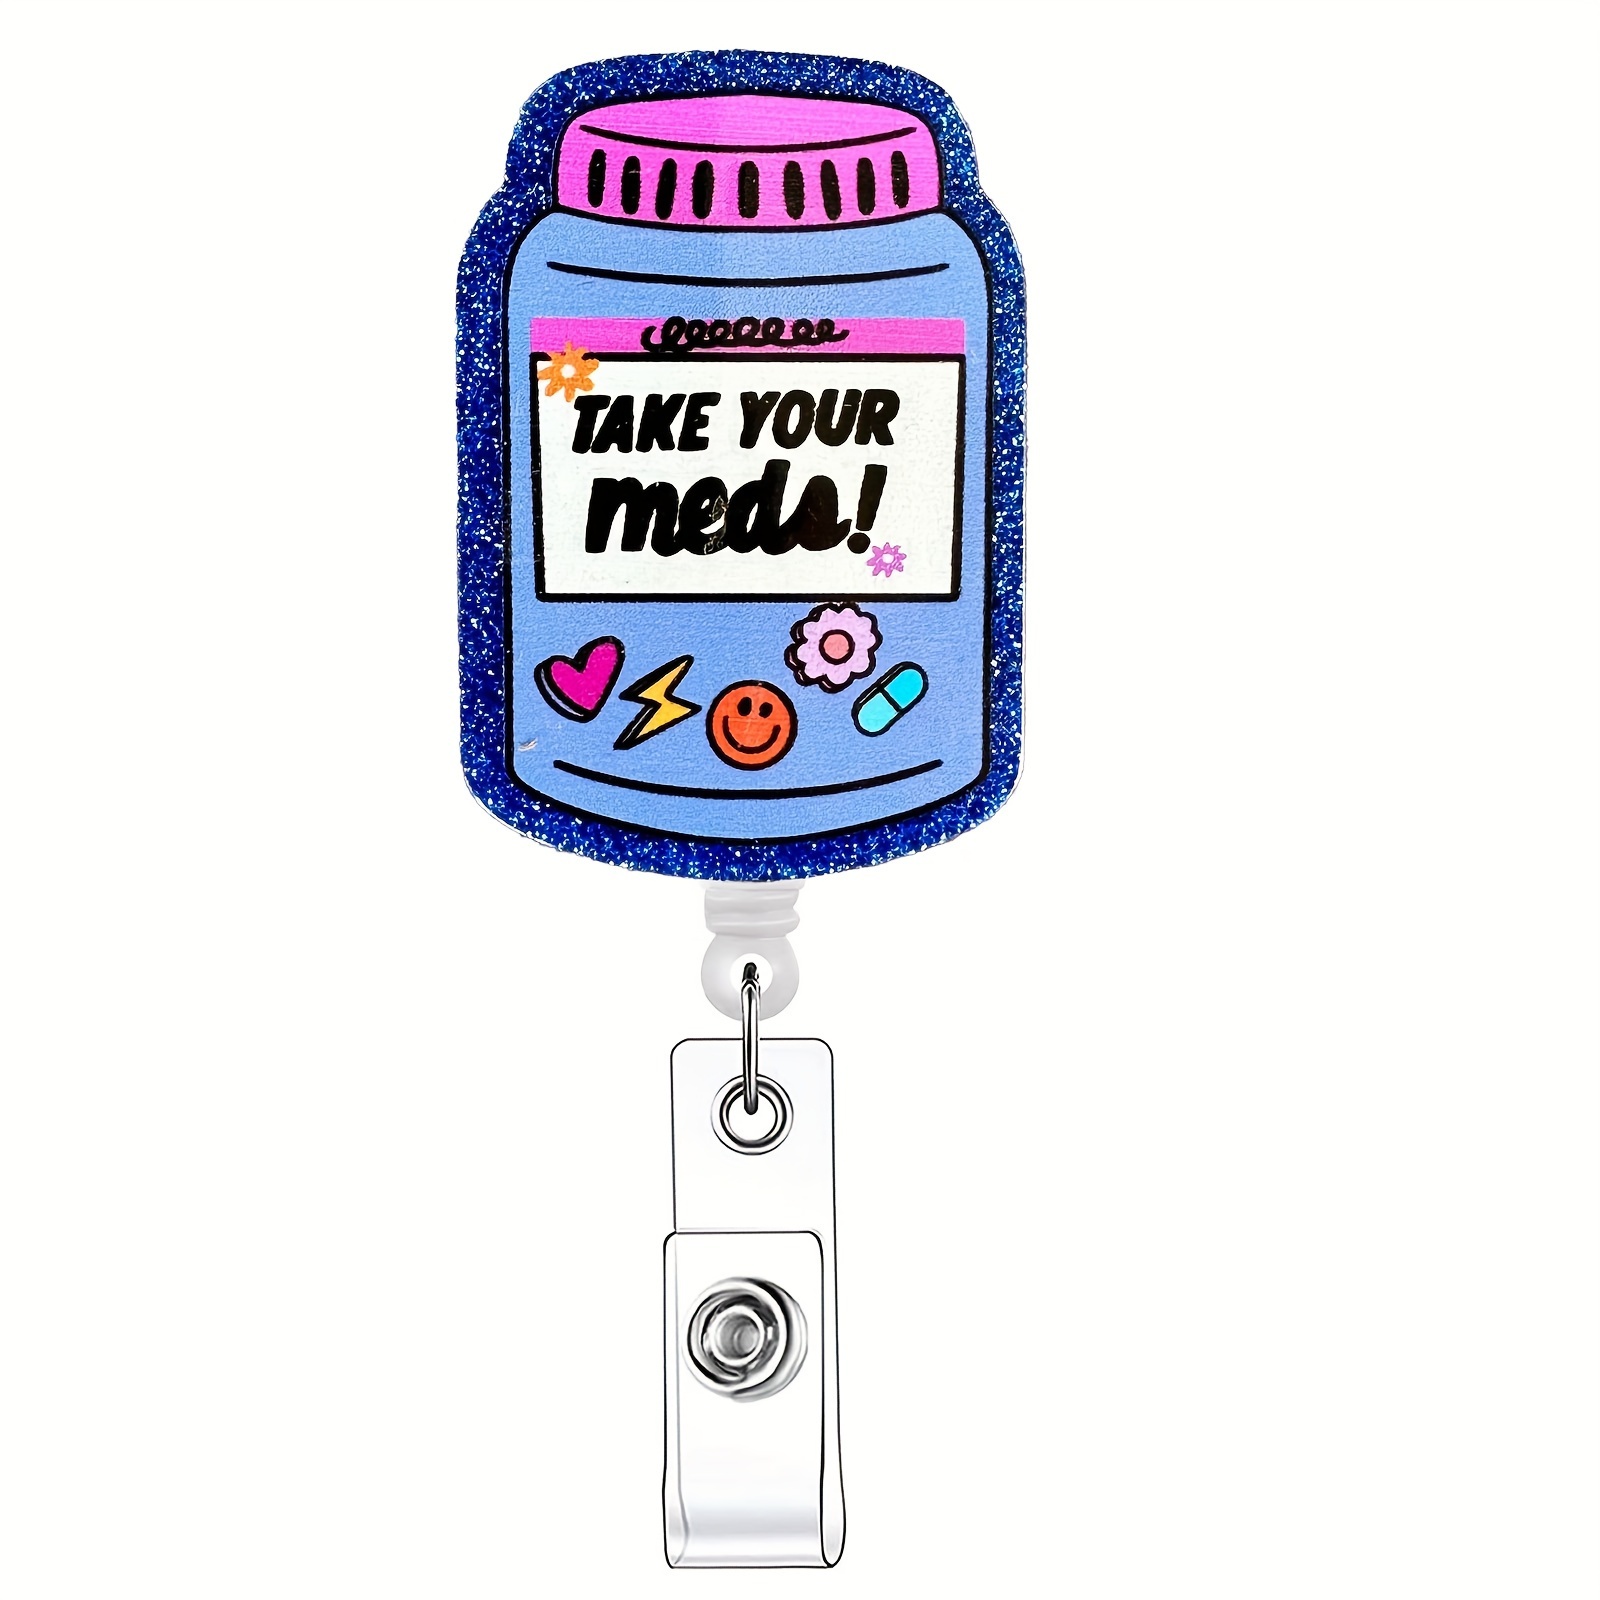 1pc Badge Reels Holder Retractable With ID Clip For Nurse Name Tag Card Pharmacy Pharmacist Chill Pill Cute Nursing Doctor Teacher Medical MD Work